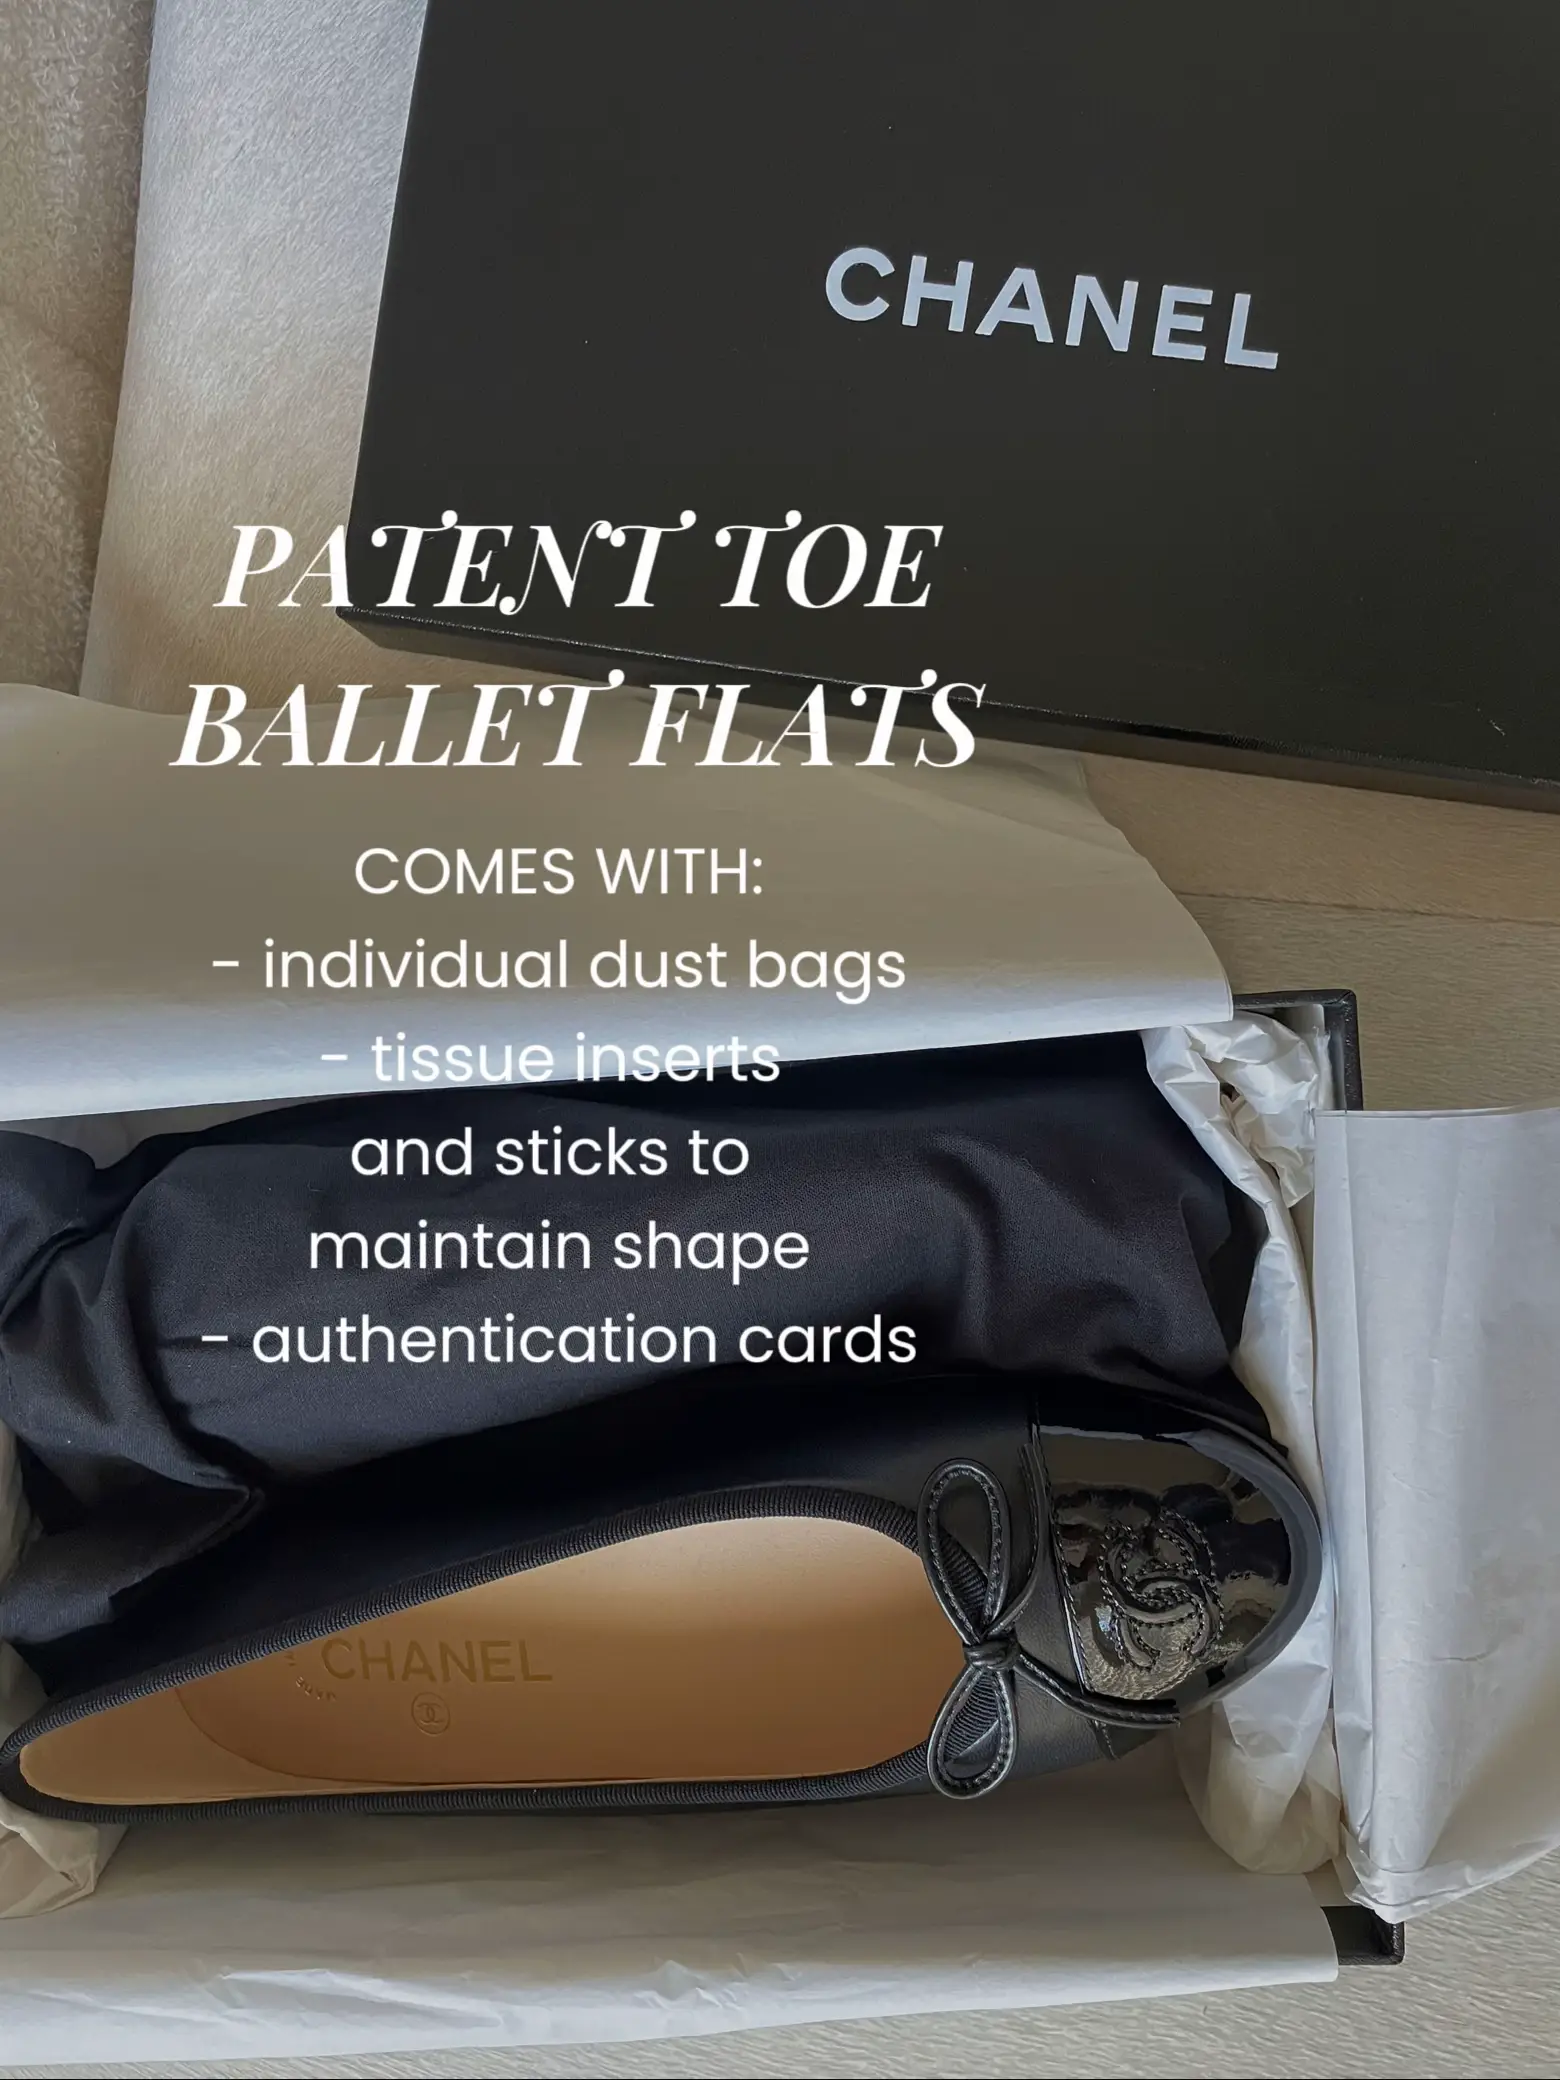 CHANEL FLATS UNBOXING🎁🎁, Gallery posted by brooke pollard!